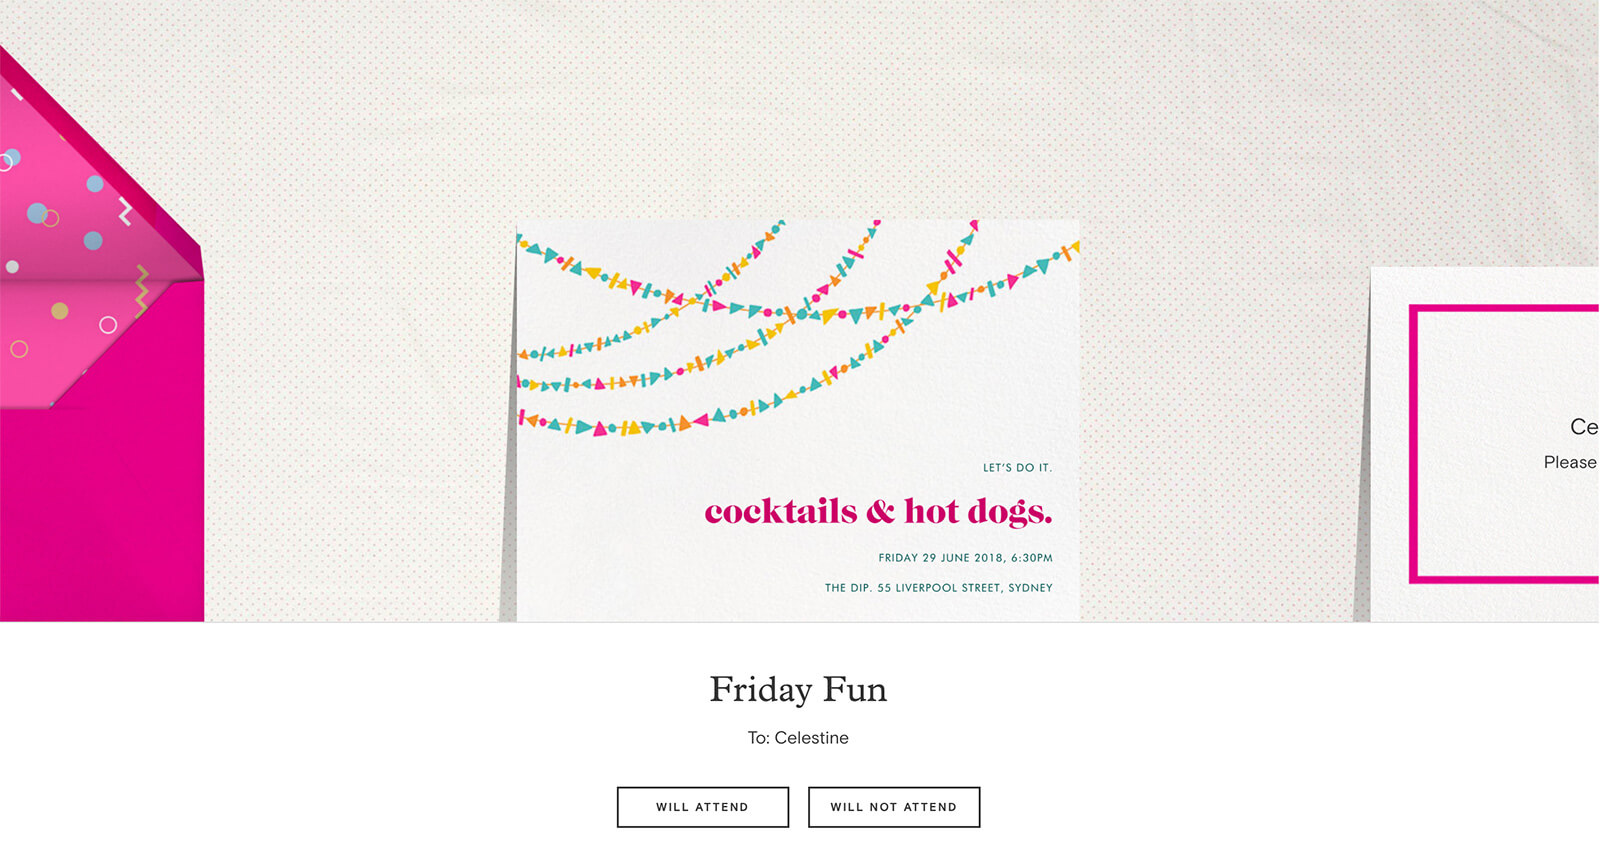 Screenshot of Paperless Post showing an invitation as it is received. The events read “cocktails & hot dogs.”